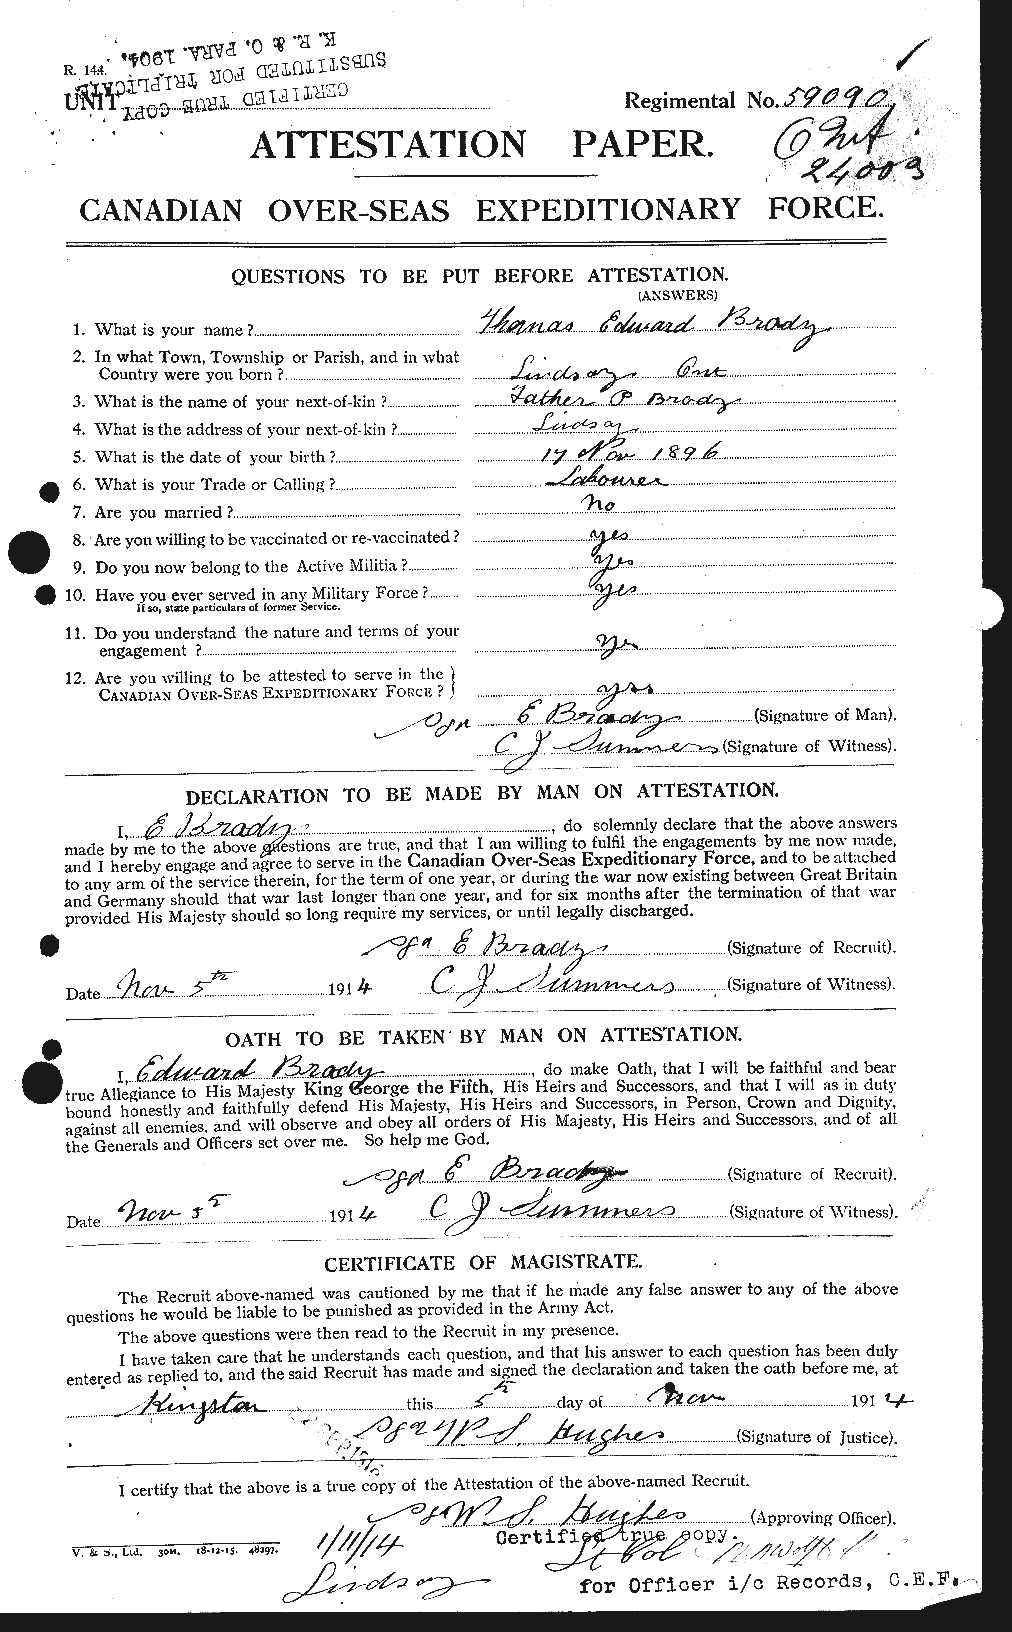 Personnel Records of the First World War - CEF 257256a